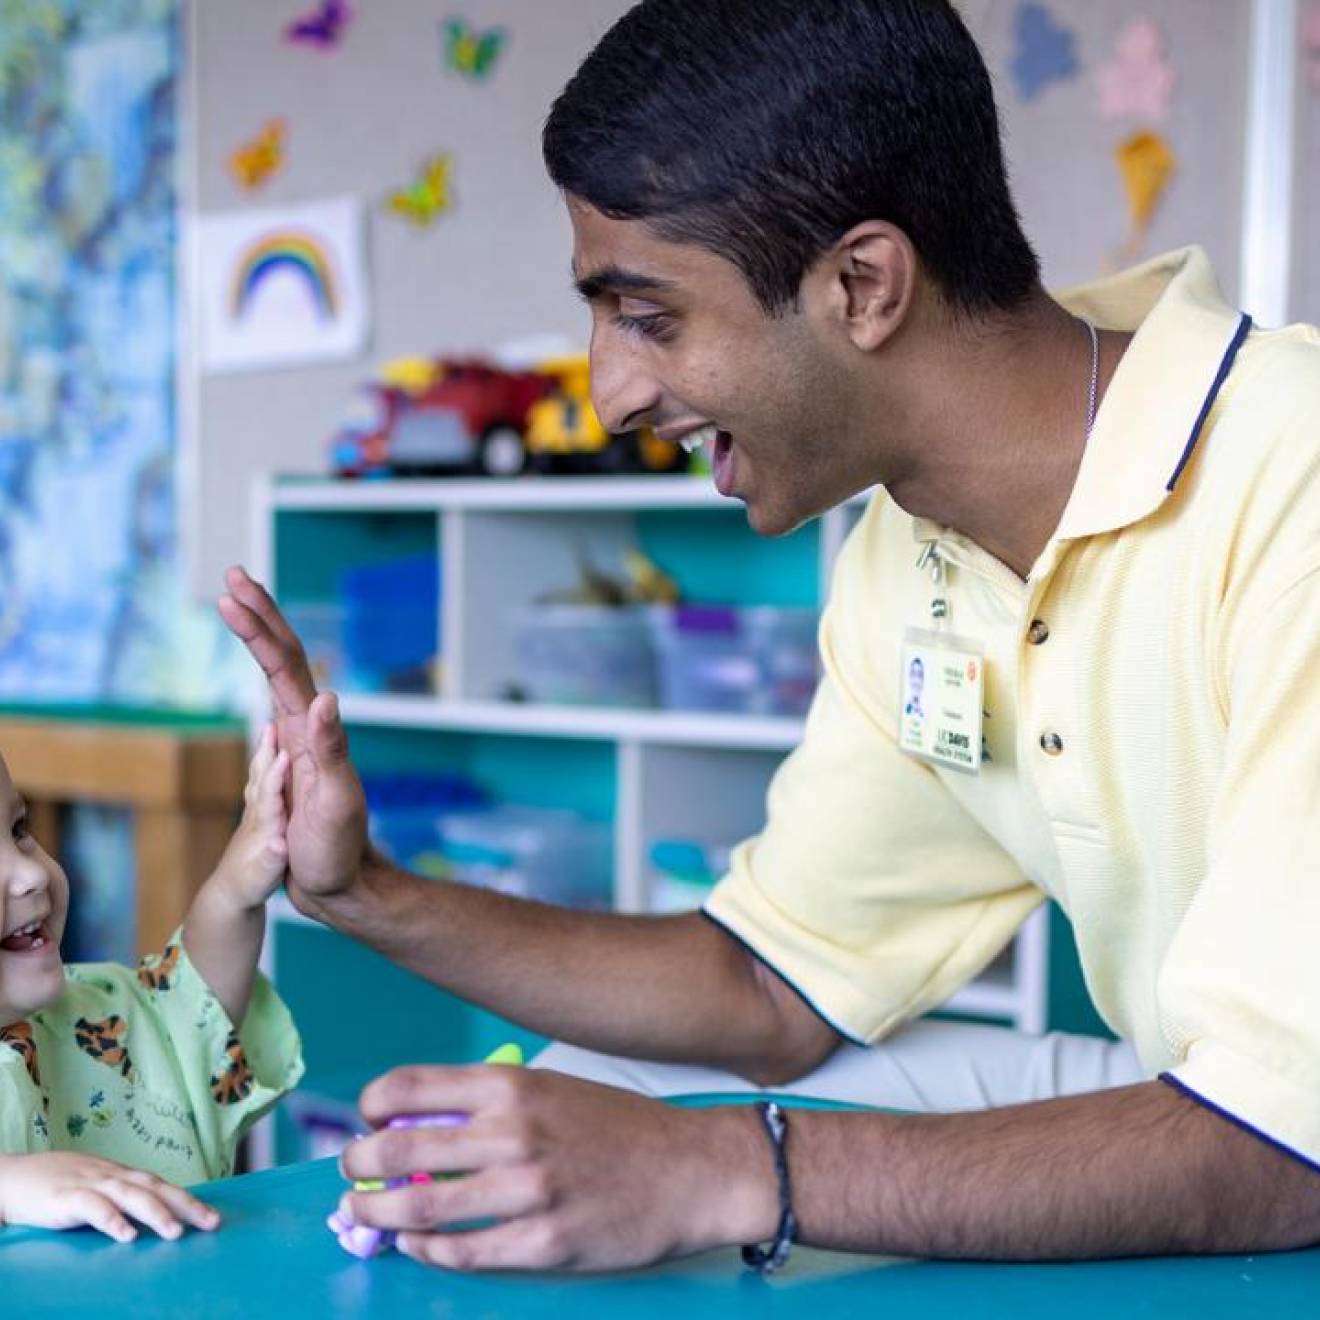 Neeraj Senthil high-fives a laughing baby at the children's hospital